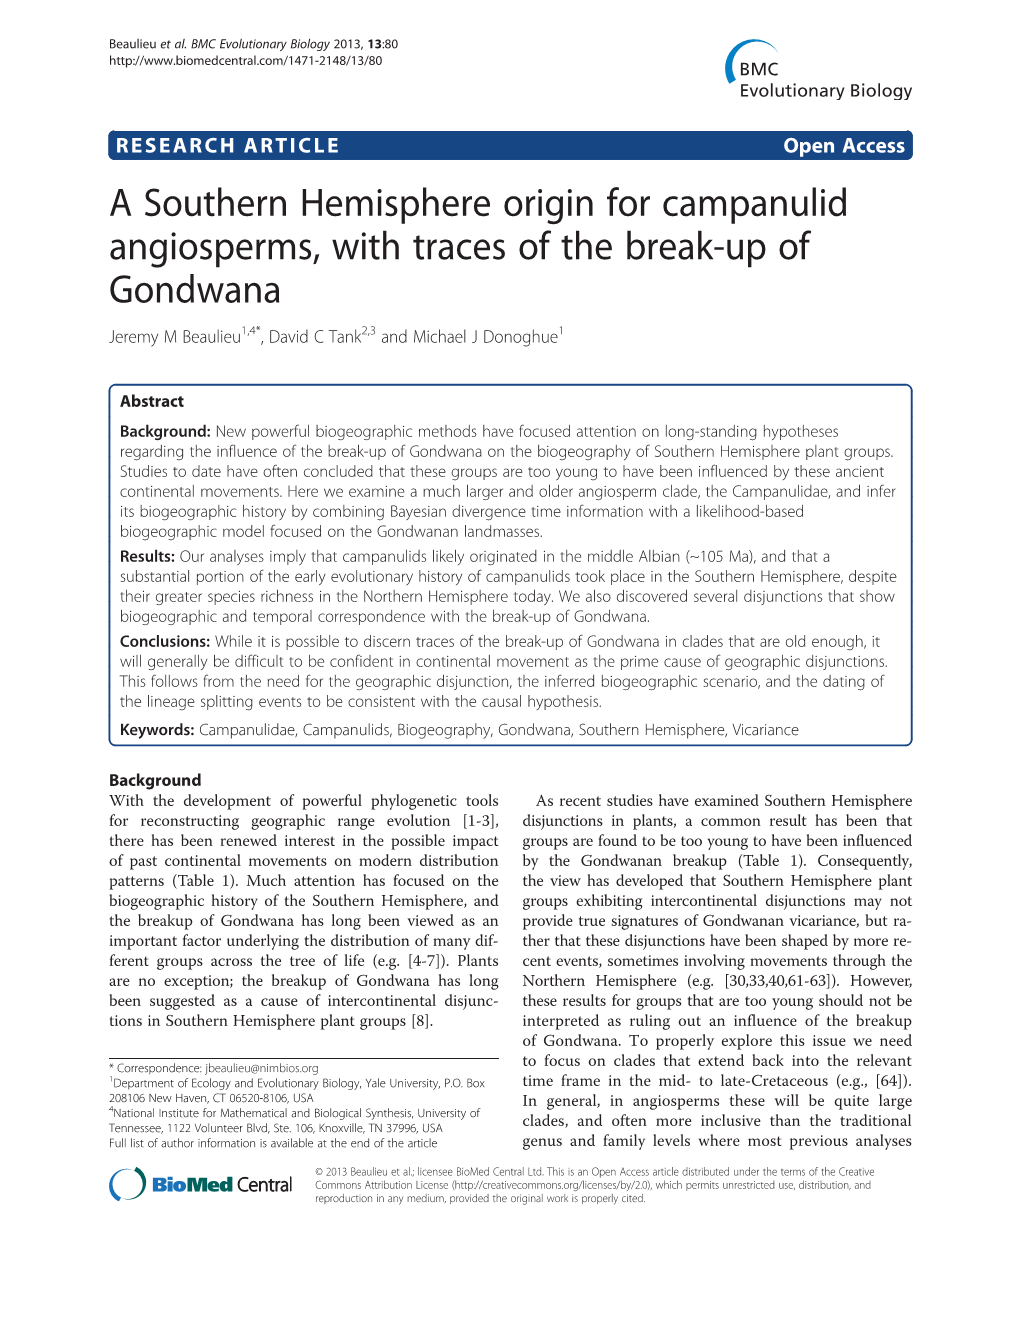 A Southern Hemisphere Origin for Campanulid Angiosperms, with Traces of the Break-Up of Gondwana Jeremy M Beaulieu1,4*, David C Tank2,3 and Michael J Donoghue1